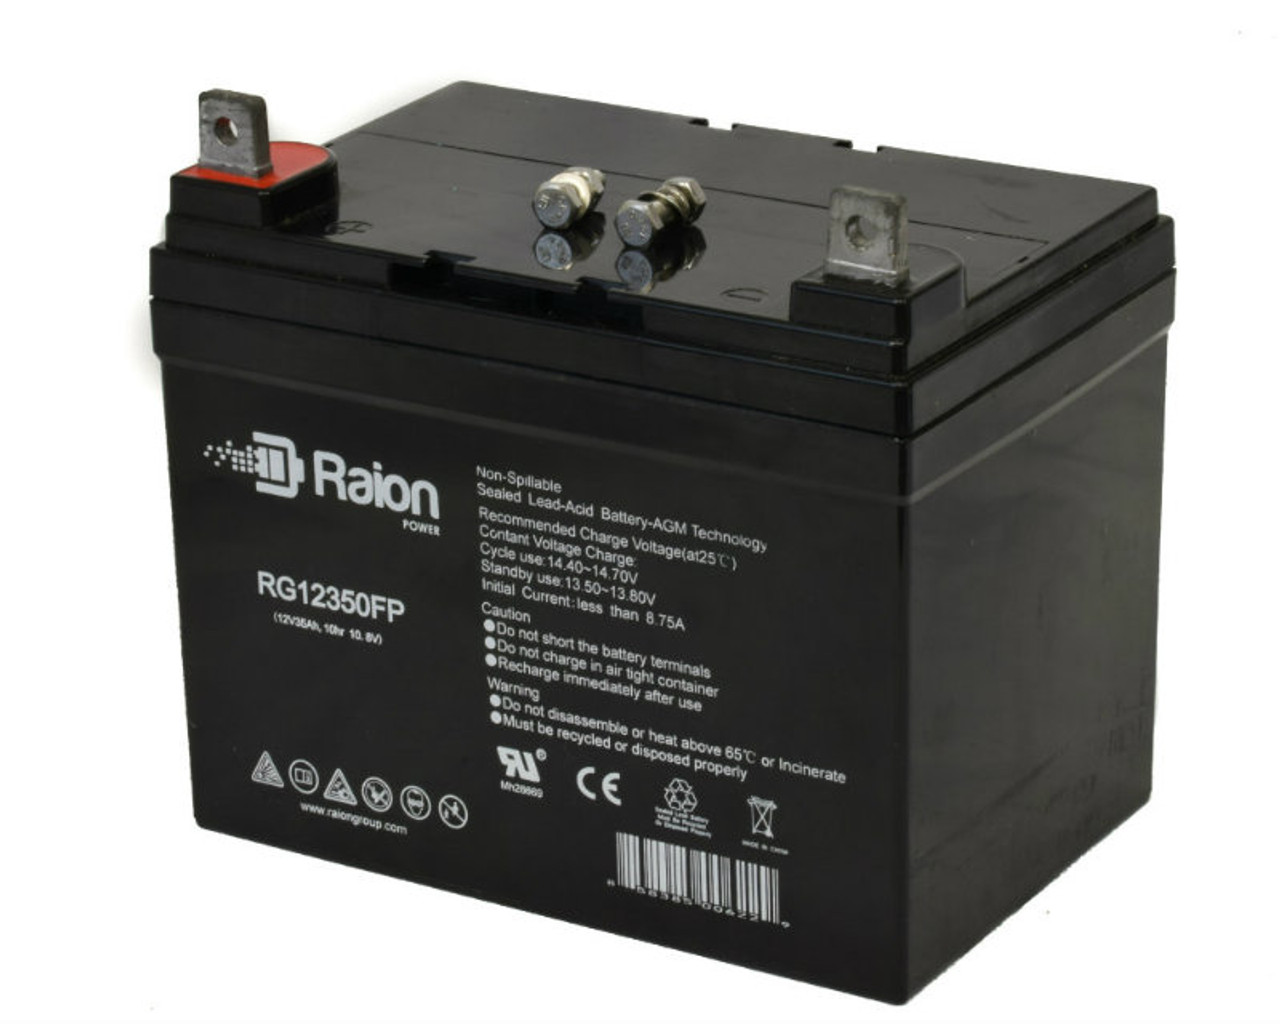 Raion Power Replacement 12V 35Ah RG12350FP Battery for Yard Machines 13A3761G700